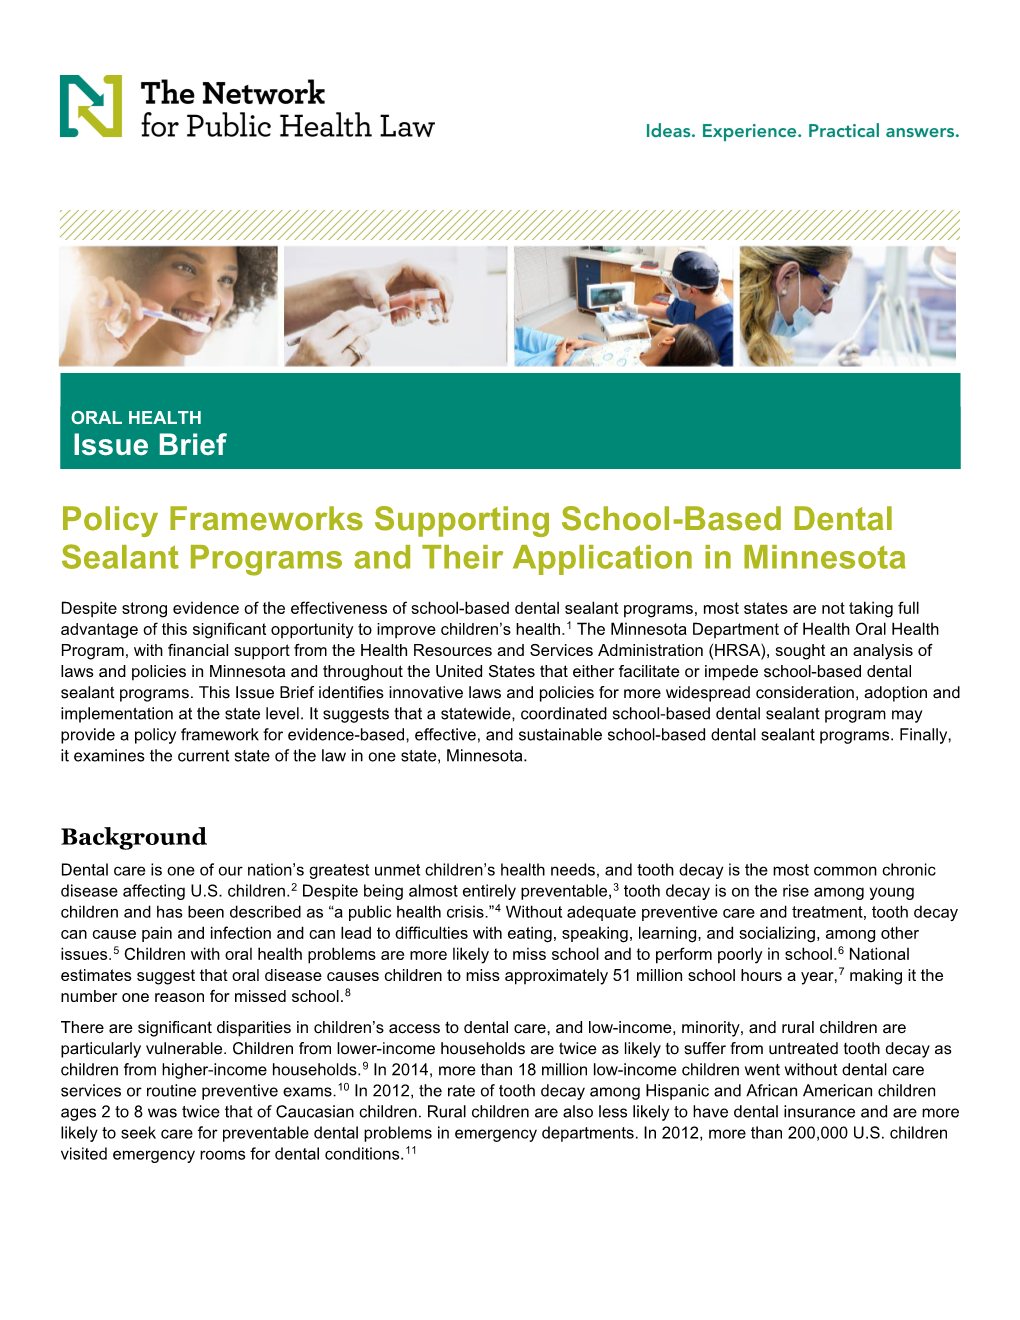 School-Based Dental Sealant Programs, This Issue Brief Now Turns to the Application of This Policy Lens to One State, Minnesota